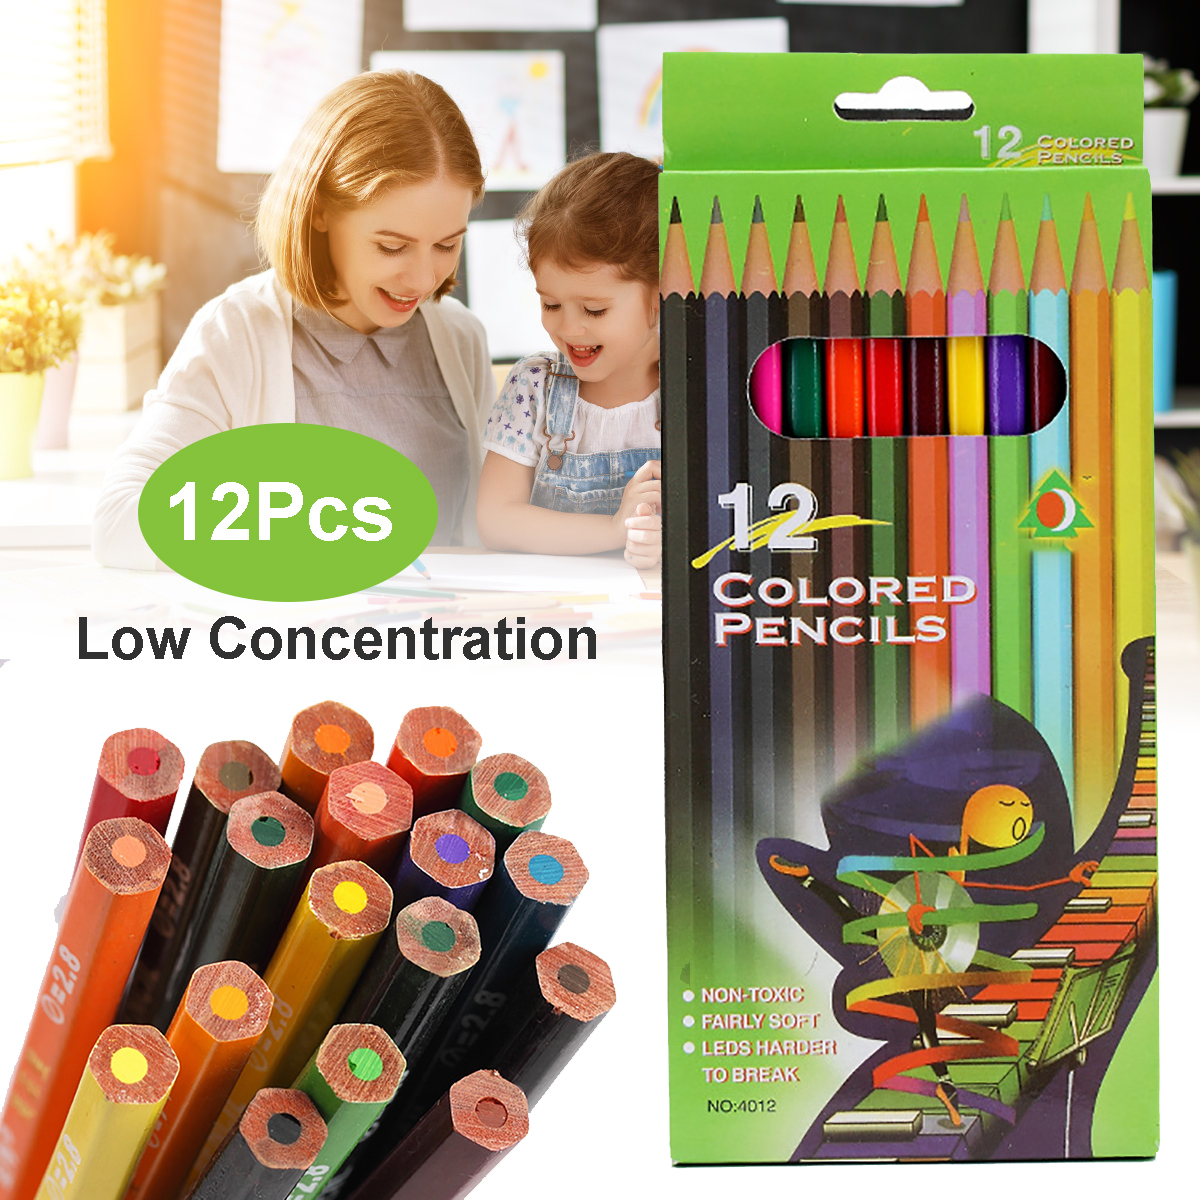 12-Colors-Wood-Color-Pencils-Set-Non-toxic-Artist-Painting-Oil-Pencil-for-School-Office-Drawing-Sket-1742753-1